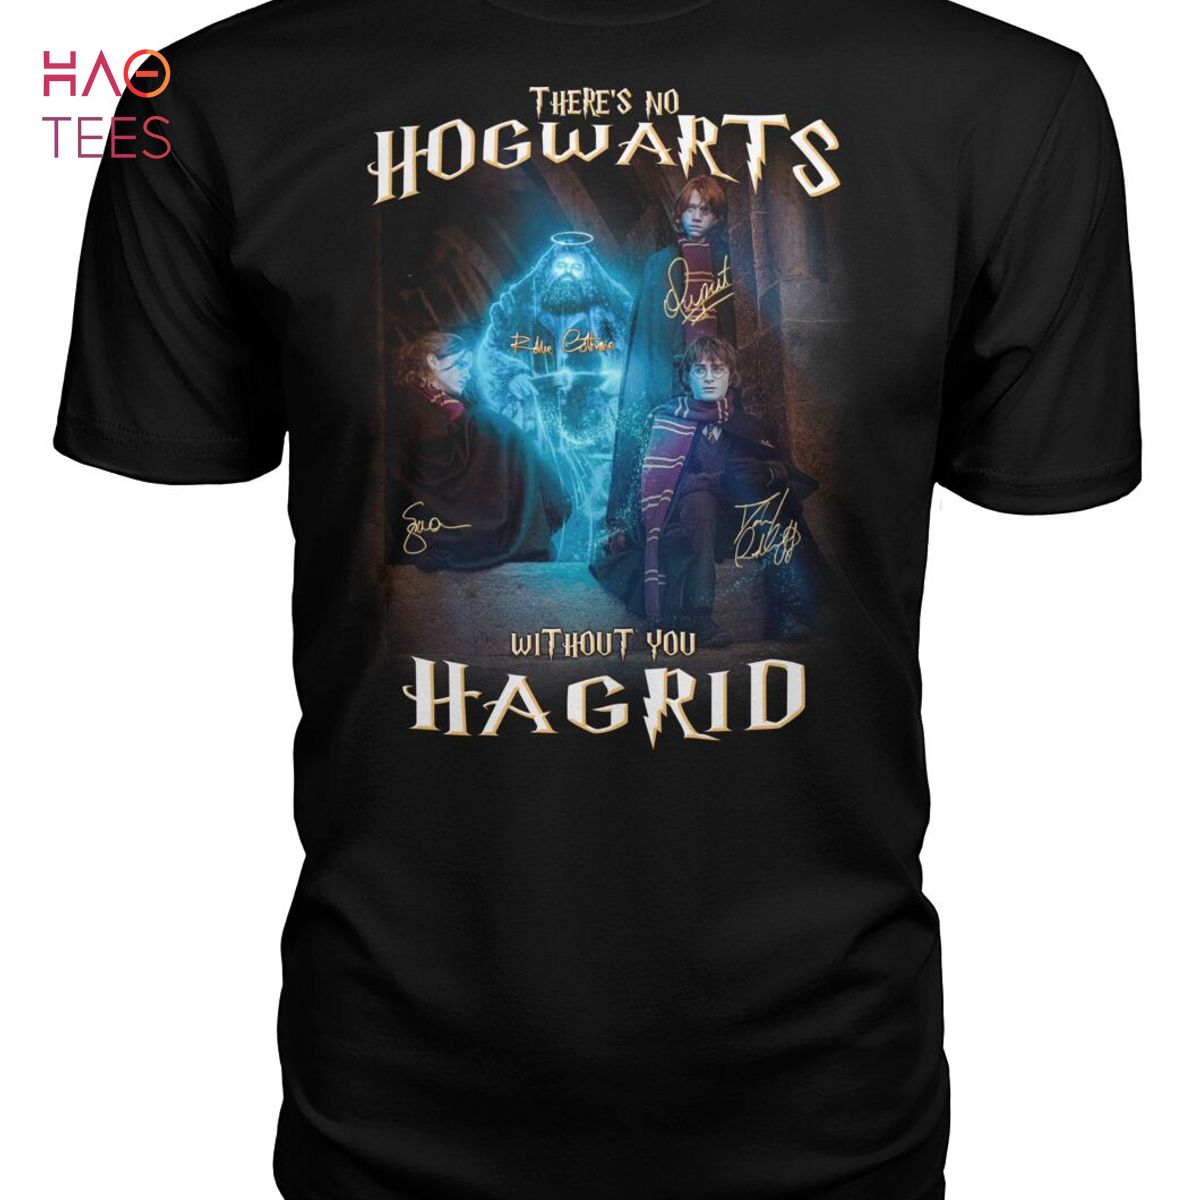 There 'S No Hogwarts Without You Hagrid Shirt